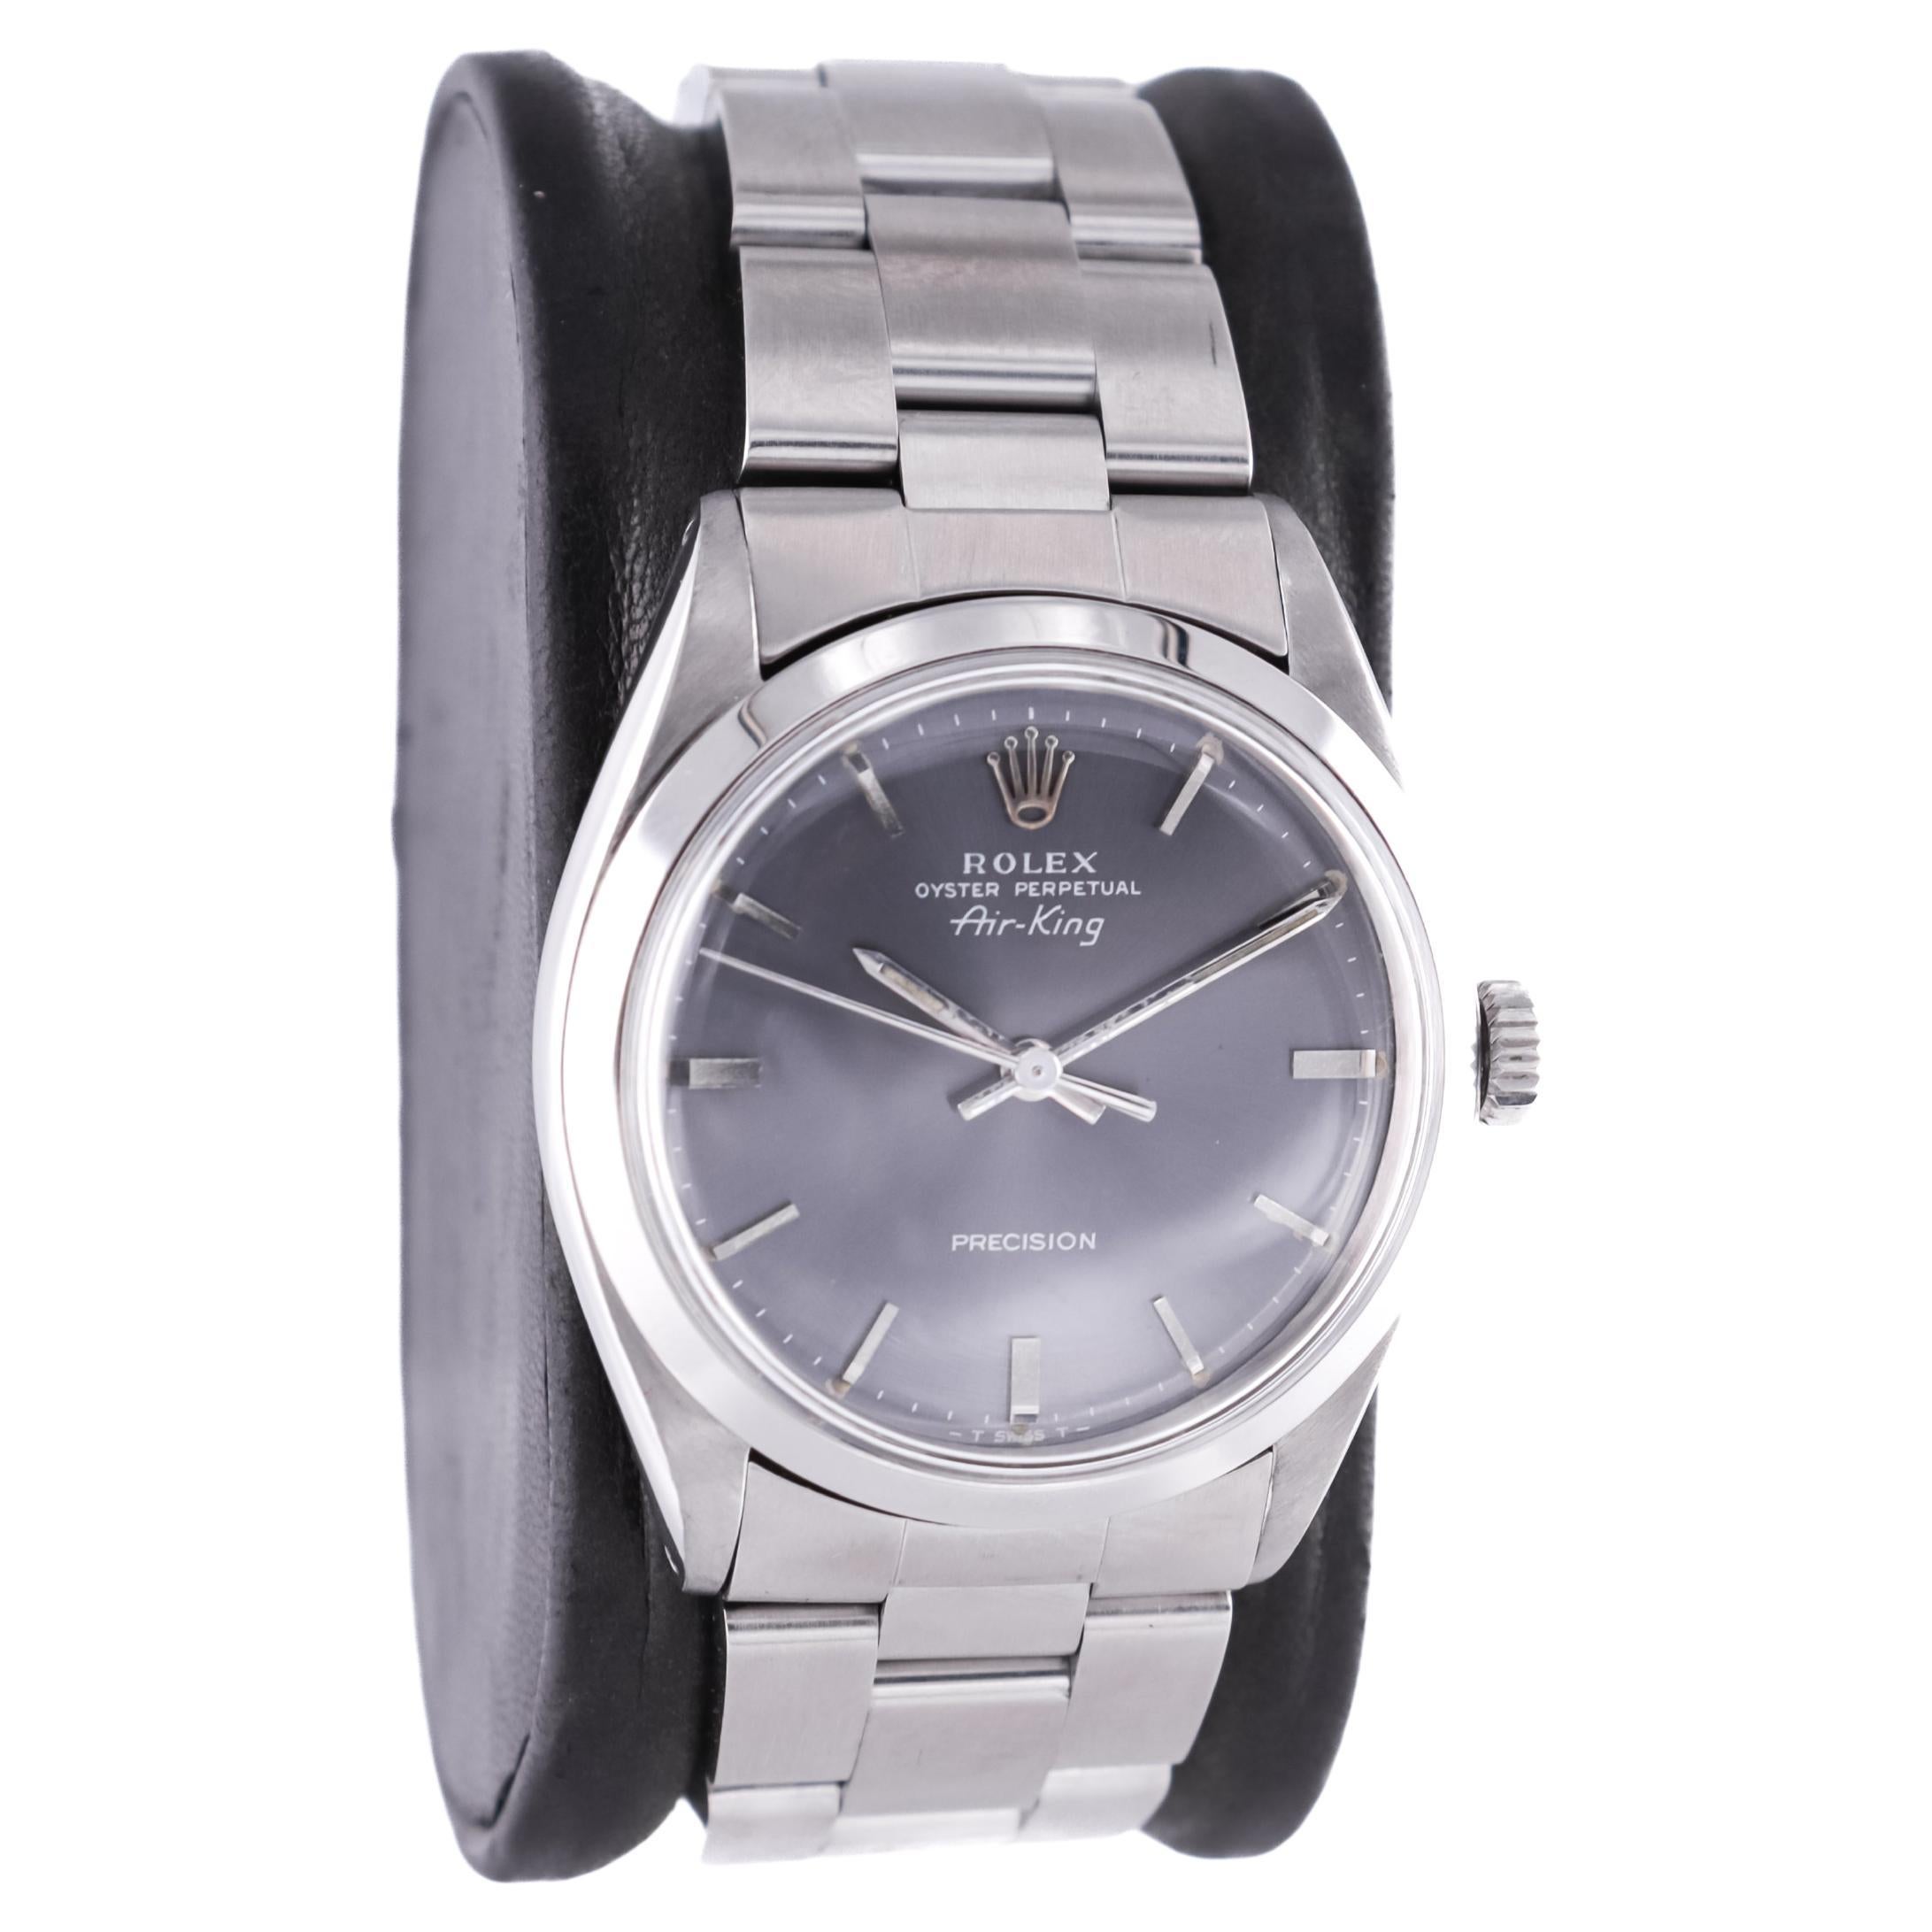 FACTORY / HOUSE: Rolex Watch Company
STYLE / REFERENCE: Oyster Perpetual Air King / Reference 5500/1002
METAL / MATERIAL: Stainless Steel
CIRCA / YEAR: 1960's
DIMENSIONS / SIZE: 39 Length X 34 Diameter
MOVEMENT / CALIBER:  Winding / 26 Jewels /